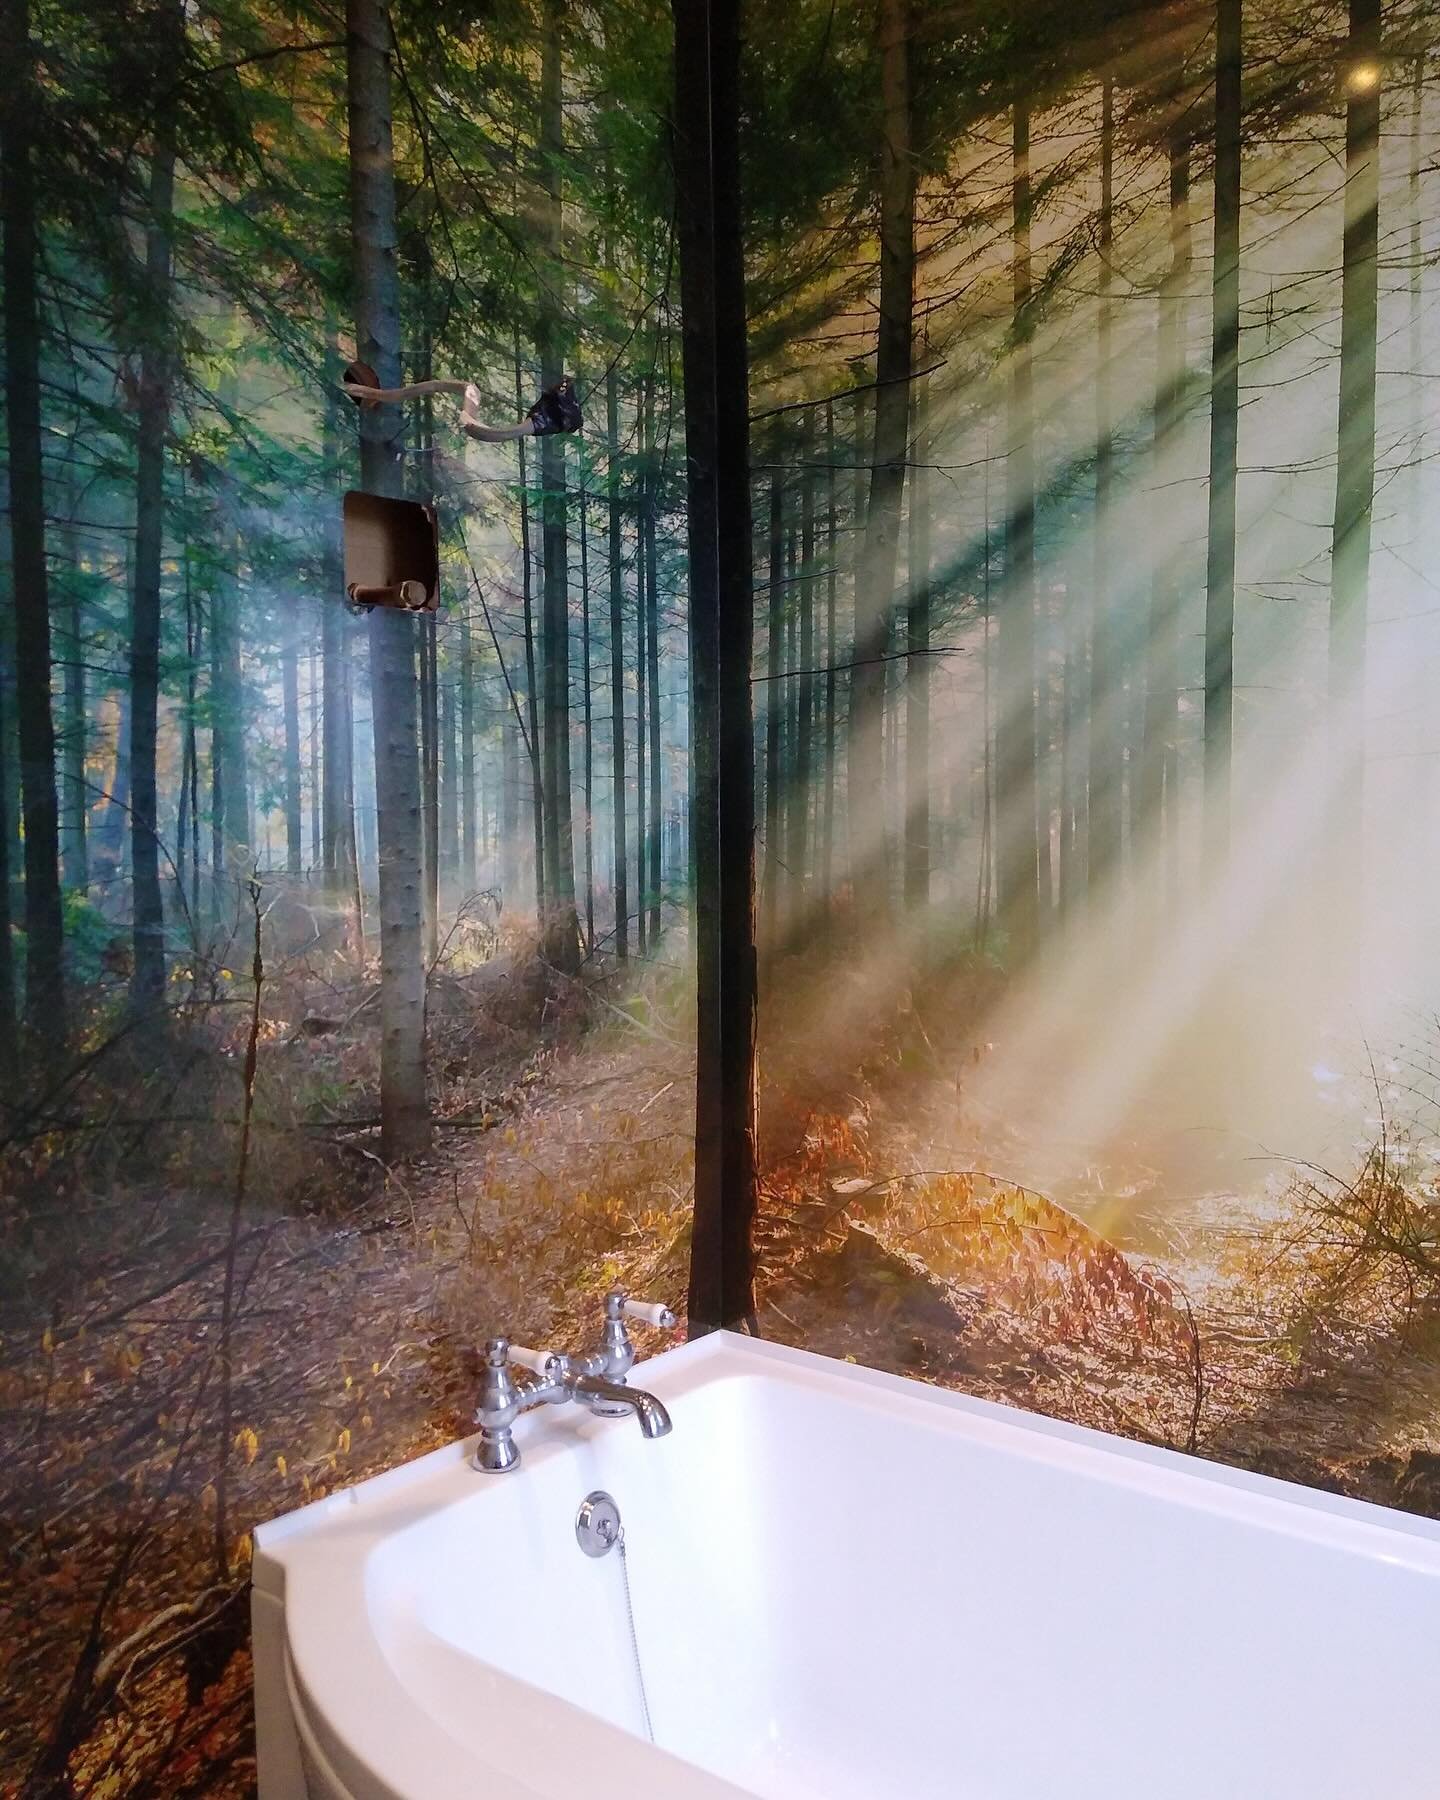 Morning Rays from our standard range looking awesome! 🤩 
We have always aimed to select the most versatile high quality images for our standard range to enable people to use them in any bathroom situation. This is a great example of our Morning Rays